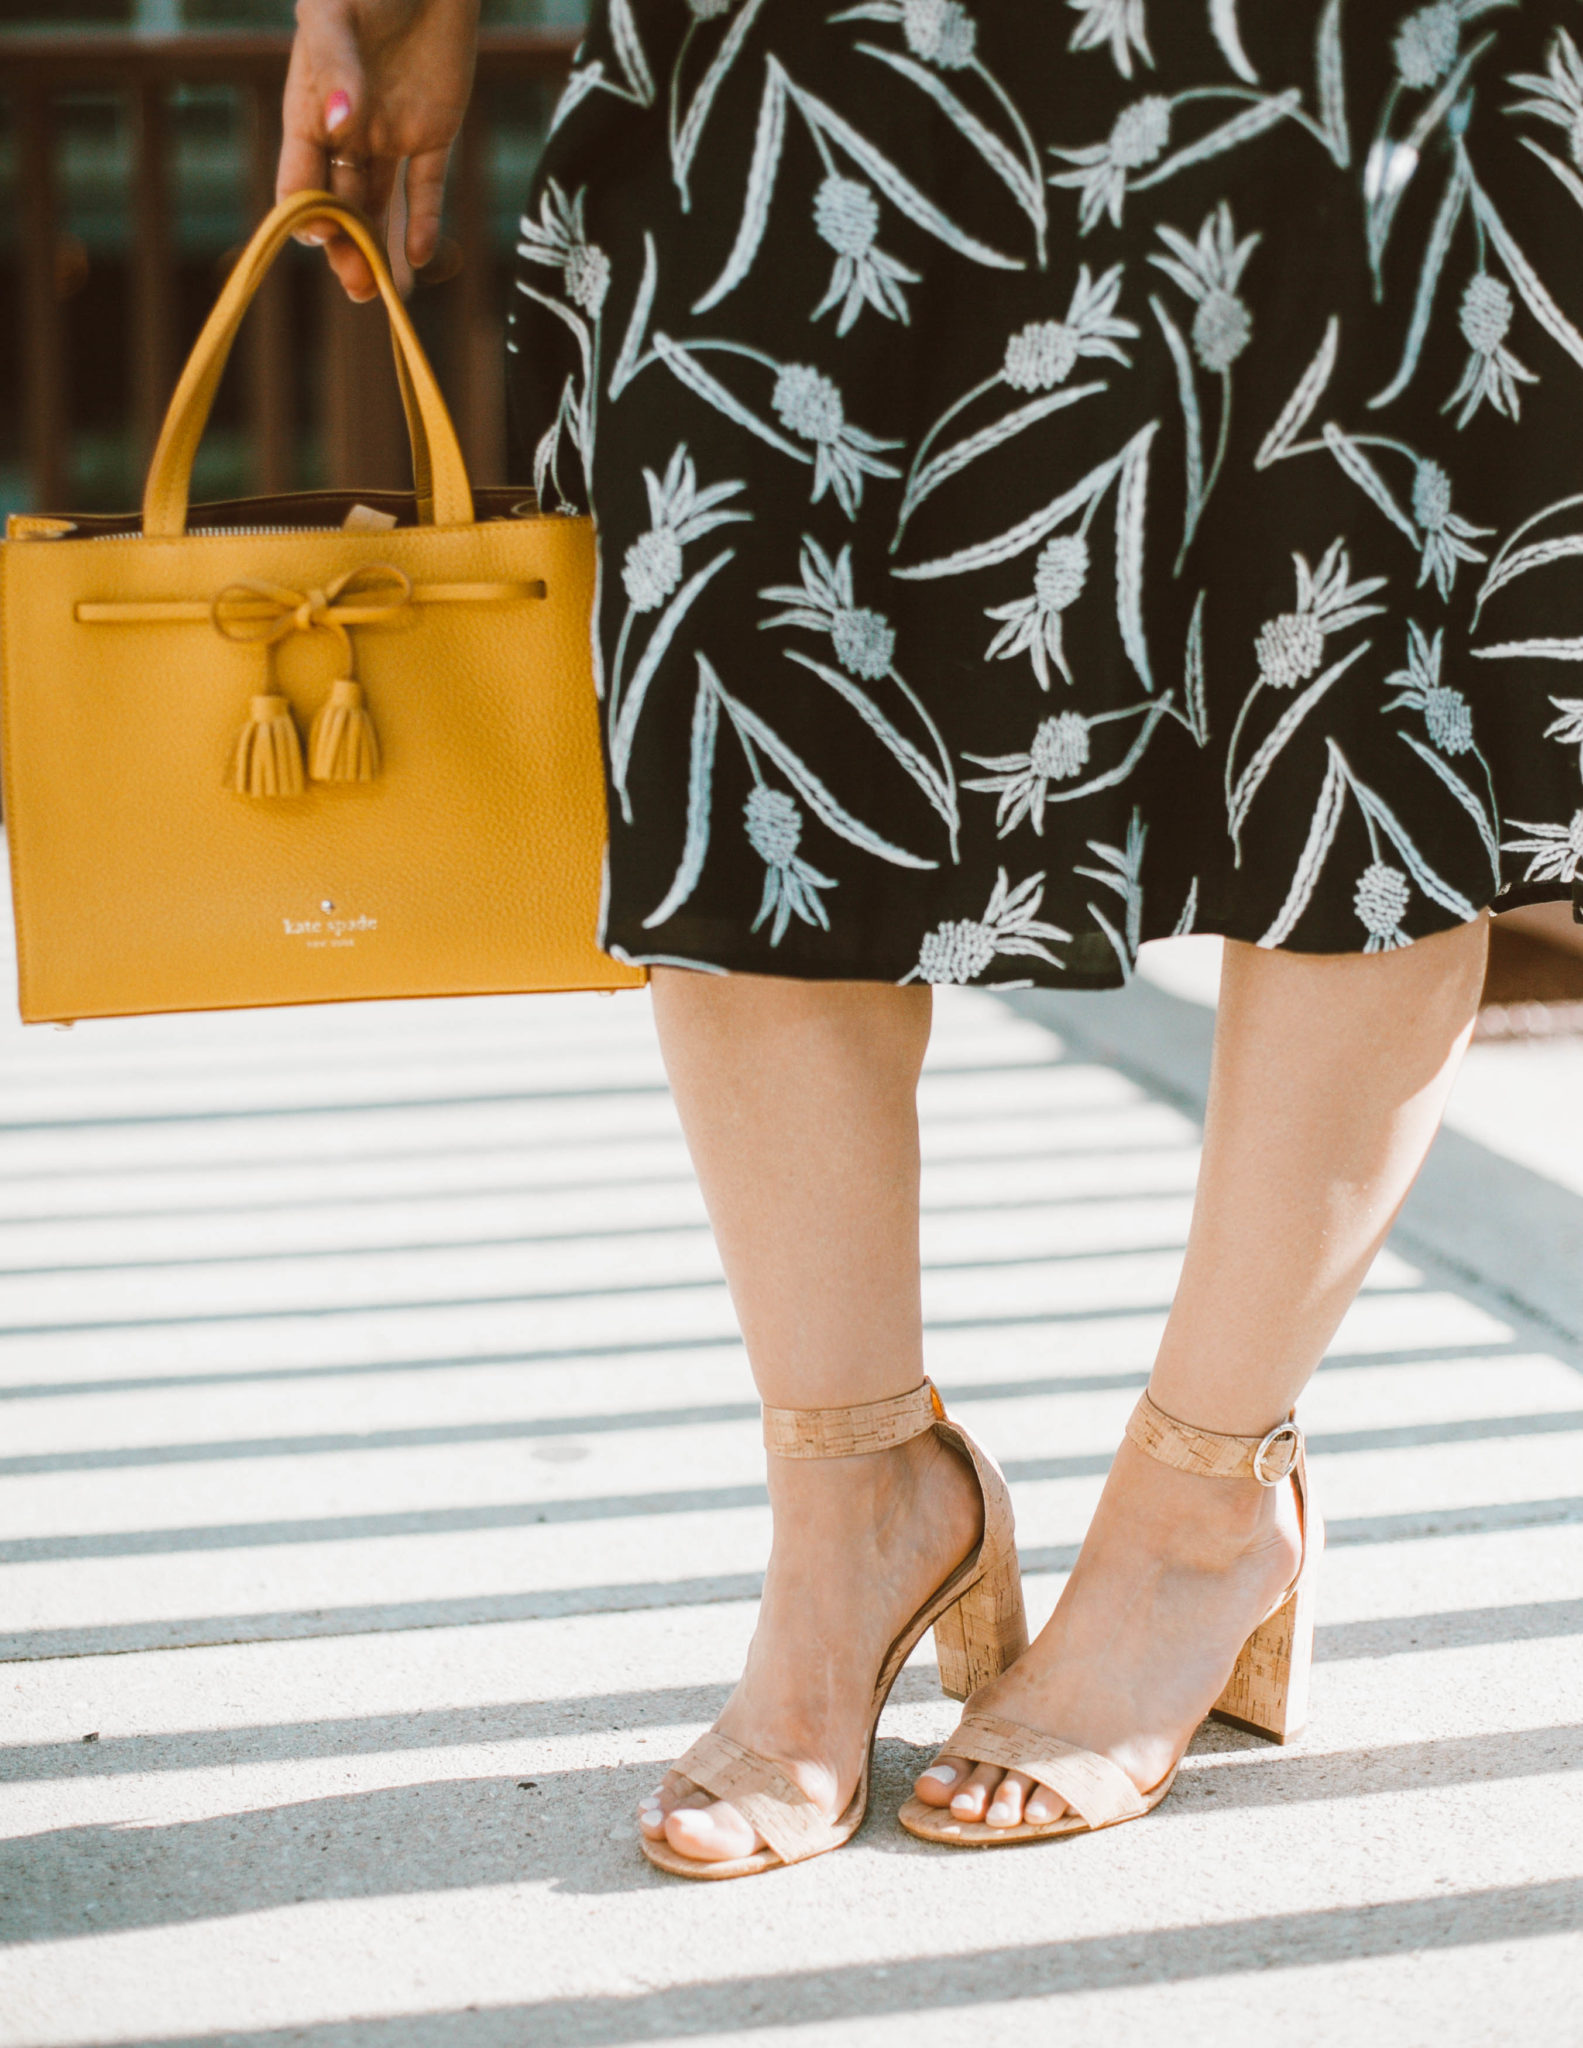 Get Ready For the Ann Taylor Summer Collection! featured by popular Chicago fashion blogger, Glass of Glam